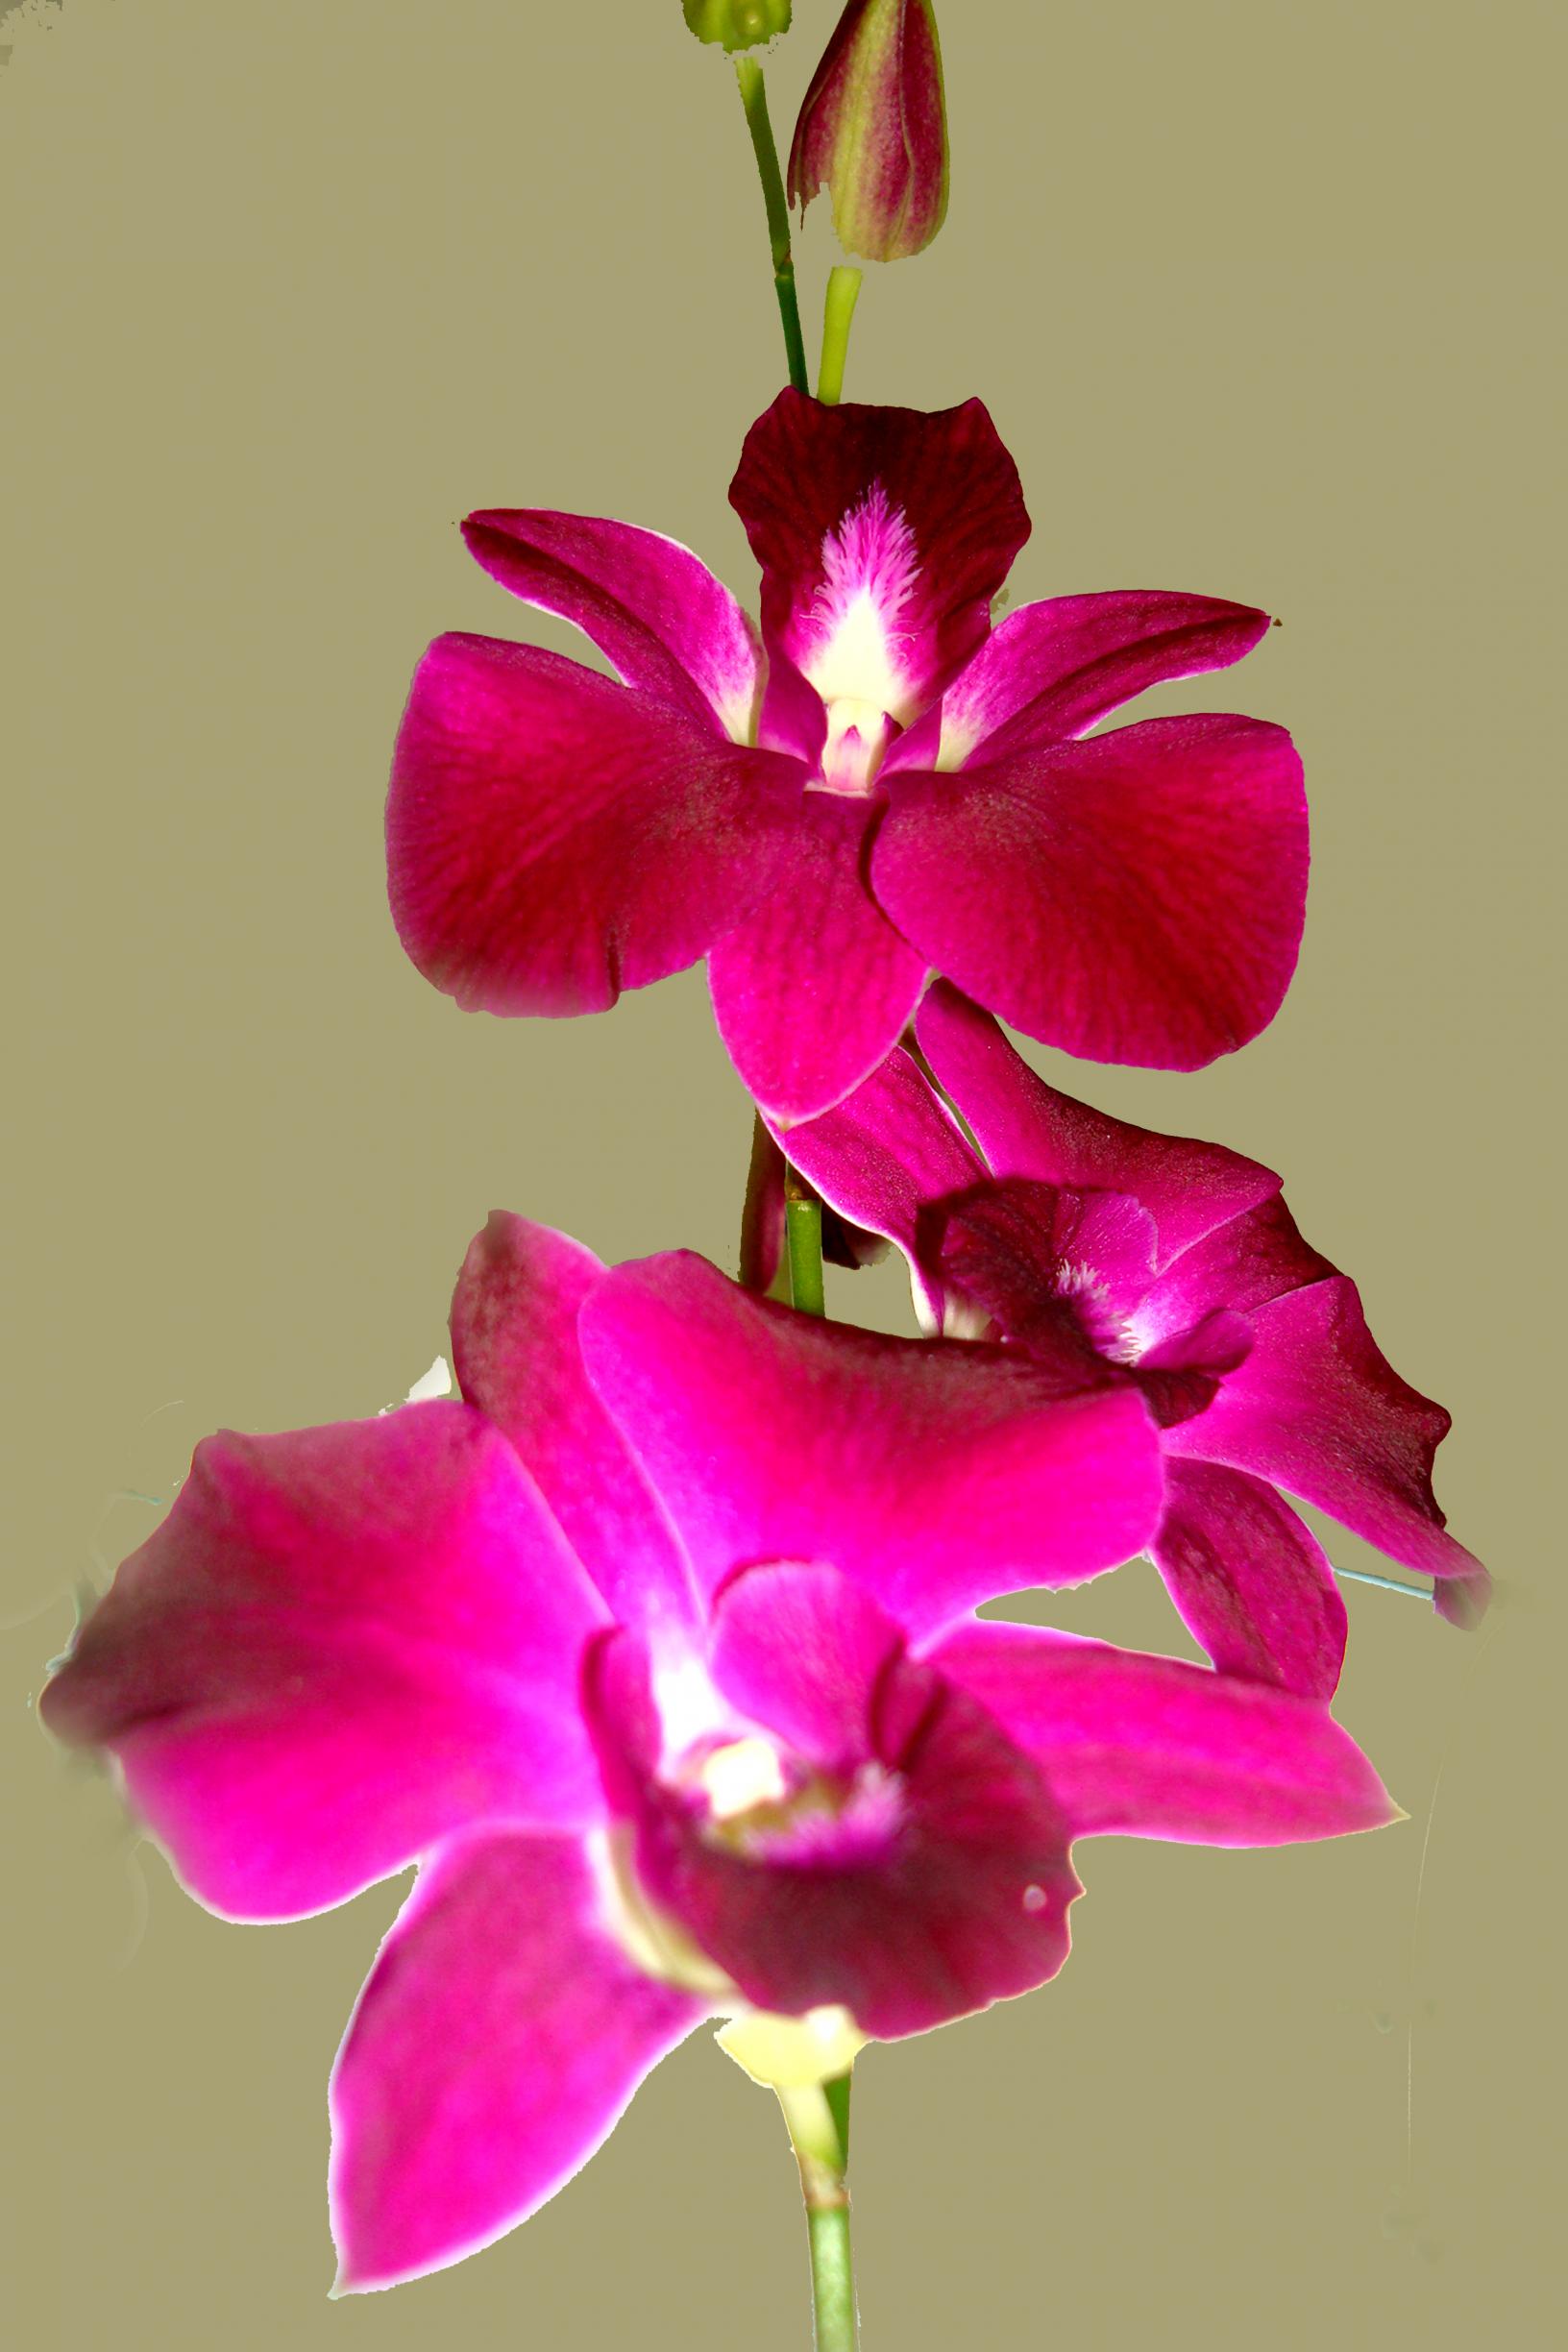 Orchid Flowers of BPATC